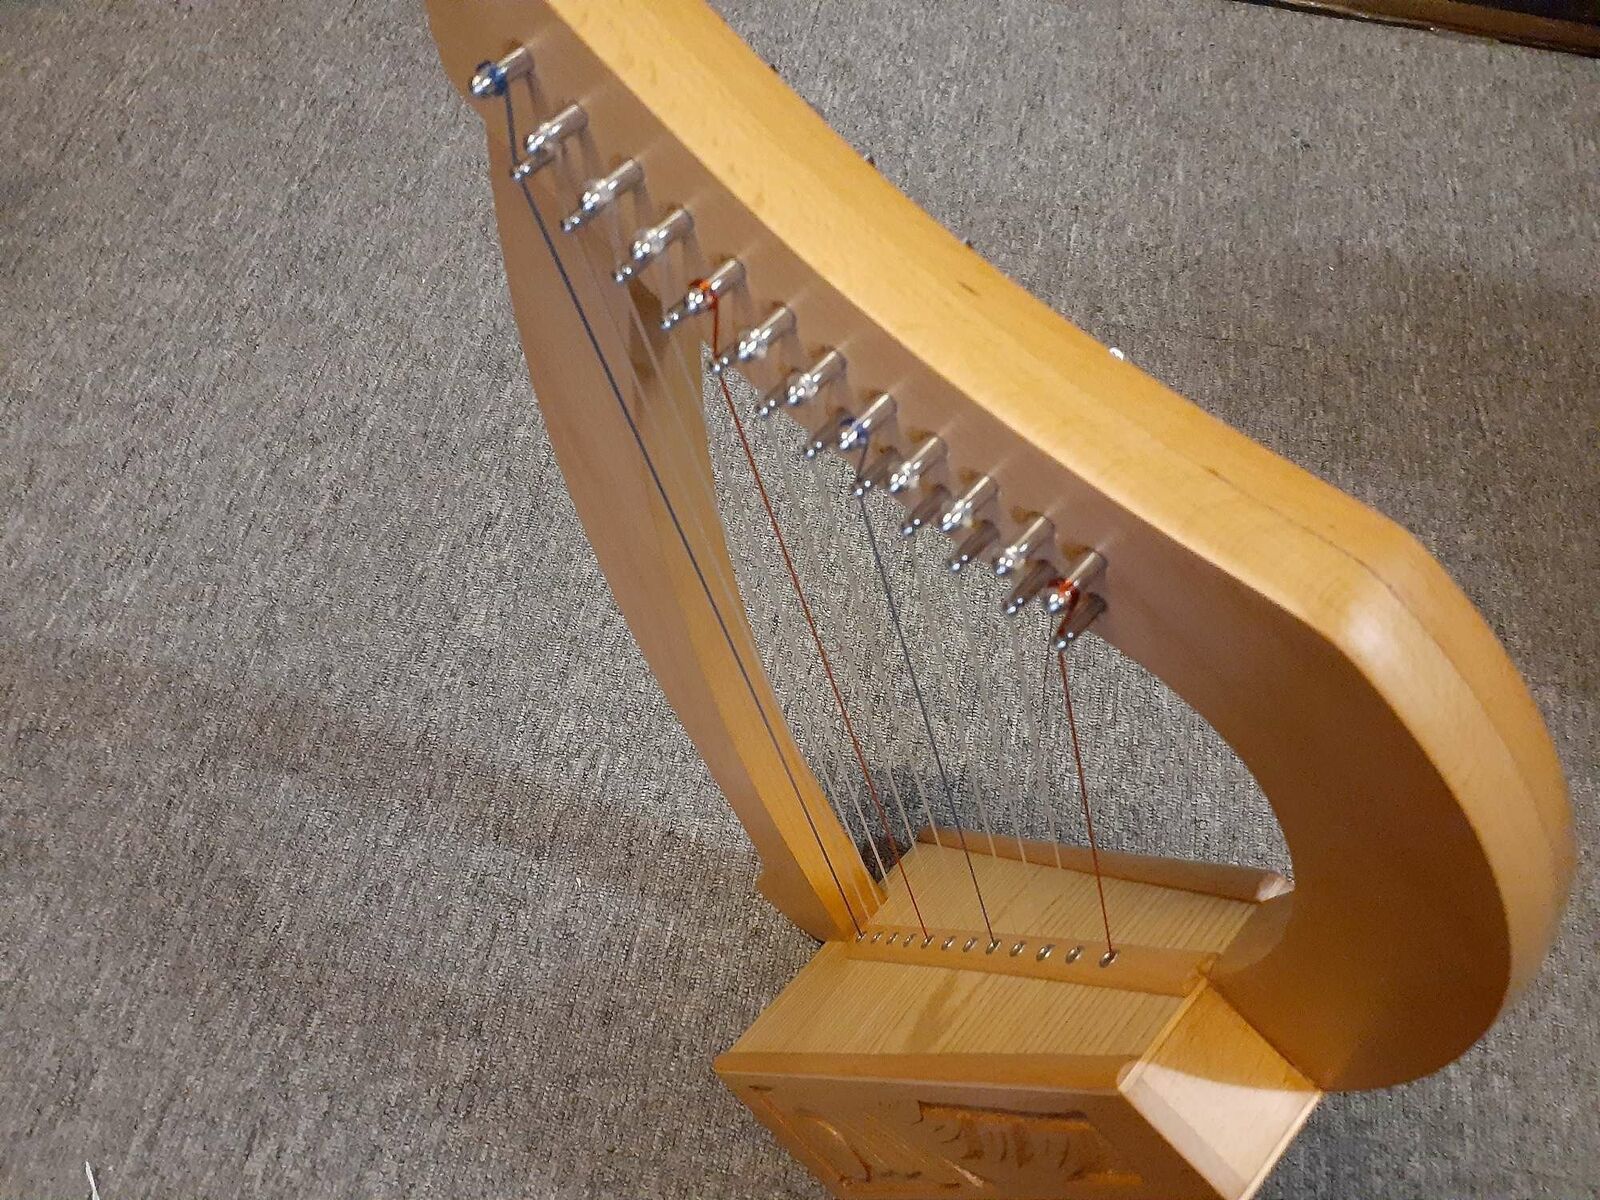  C6 to F4 Baby Harp - 12 String Carved with Bag